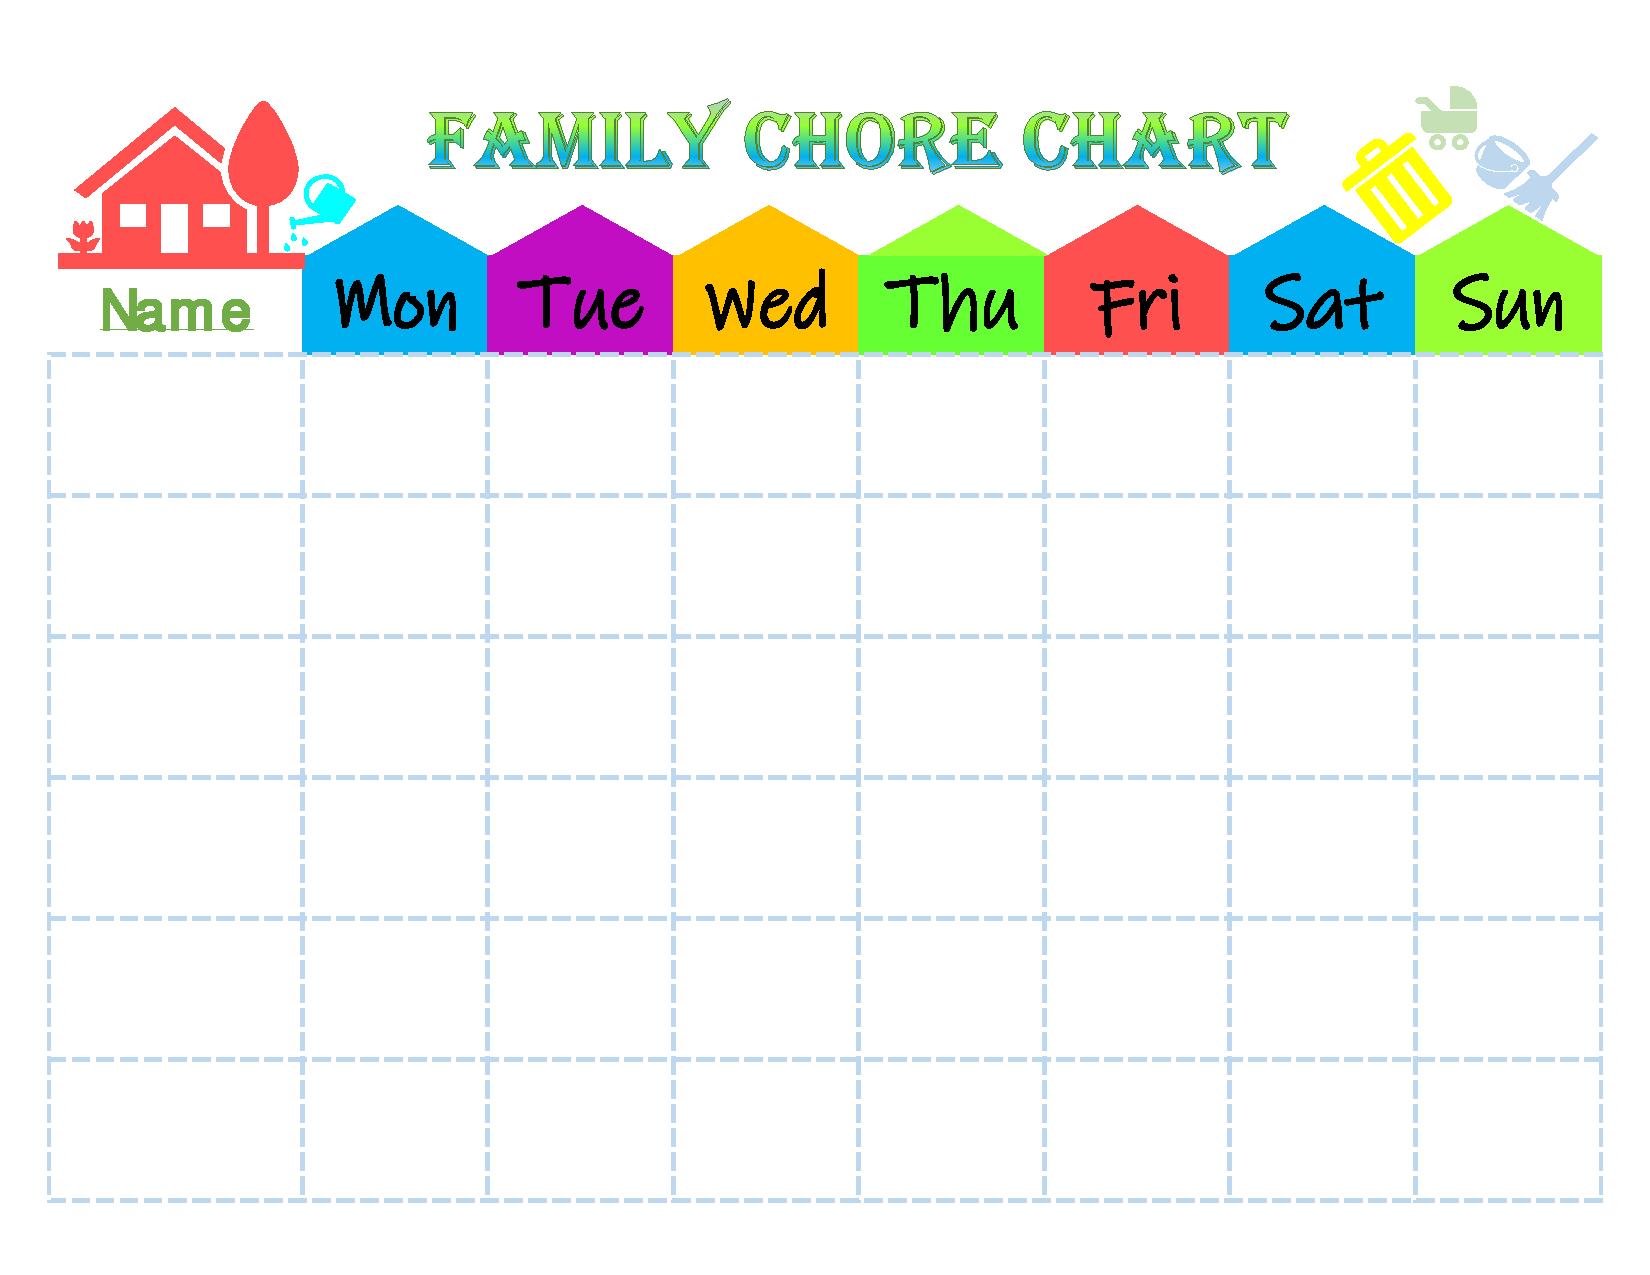 chores-for-kids-get-kids-helping-with-my-free-chore-chart